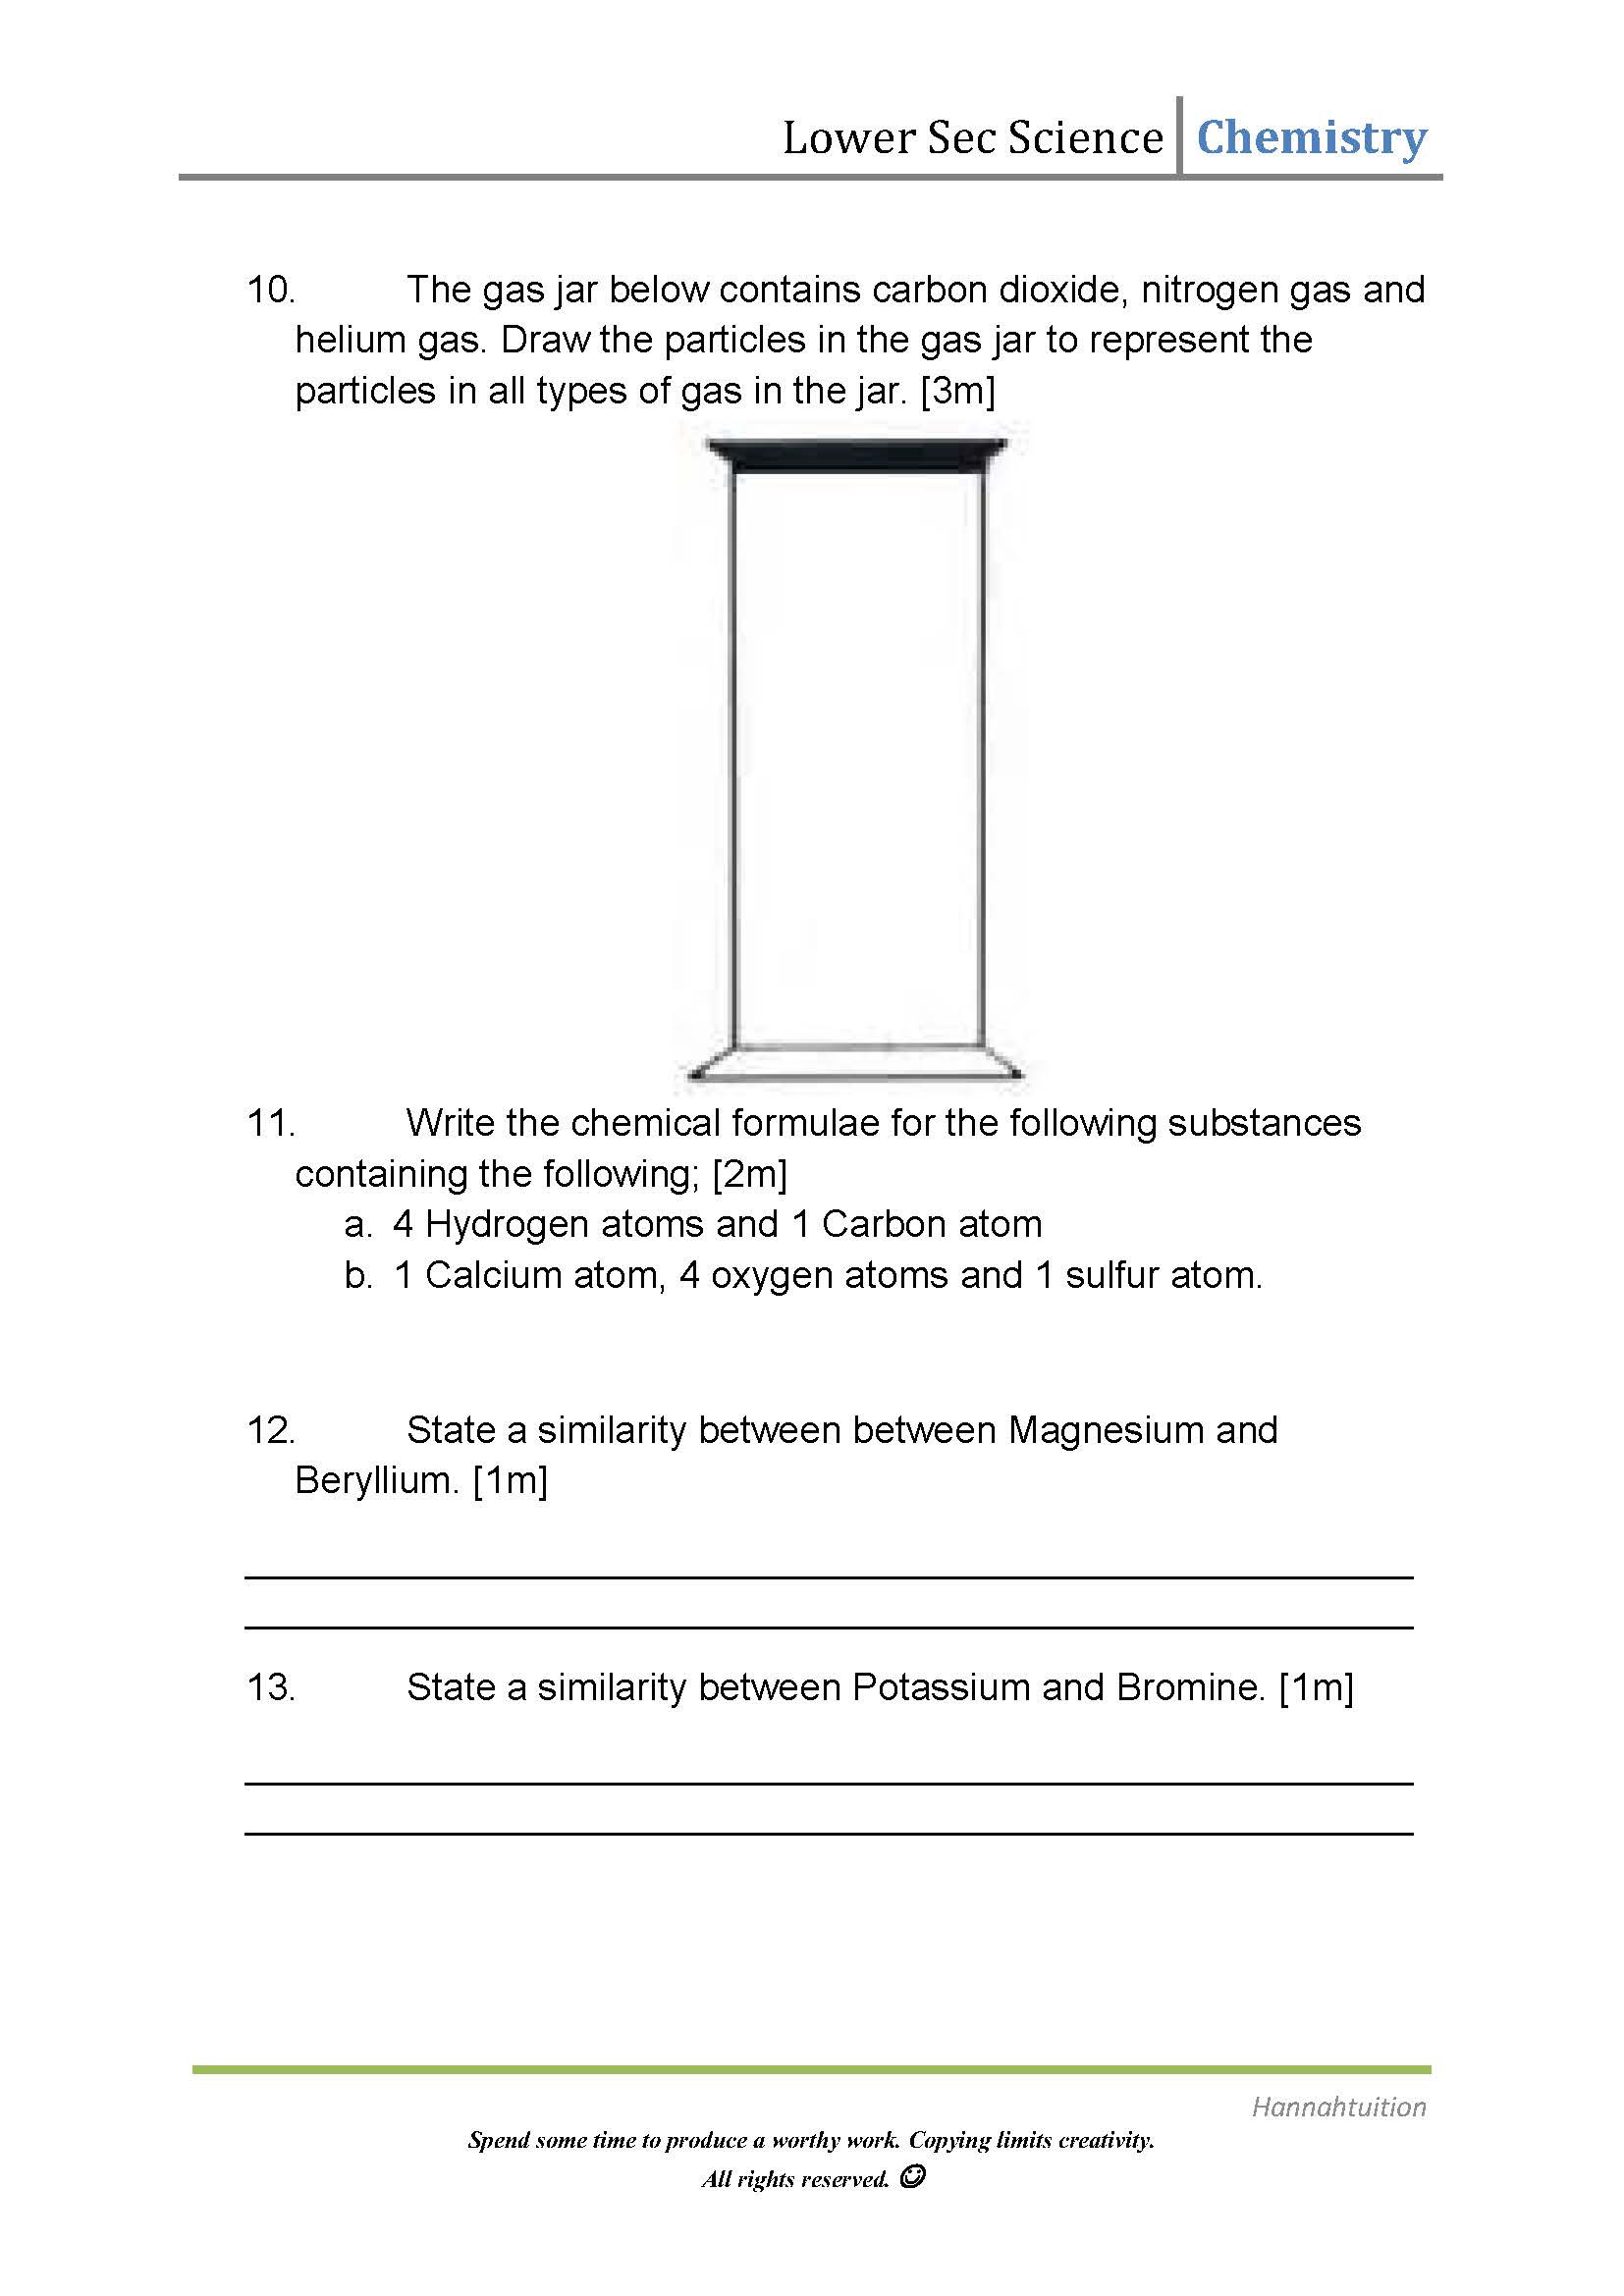 Atoms and Ions Worksheet Answers Lower Sec atoms Molecules and Ions Quiz – Hannahtuition